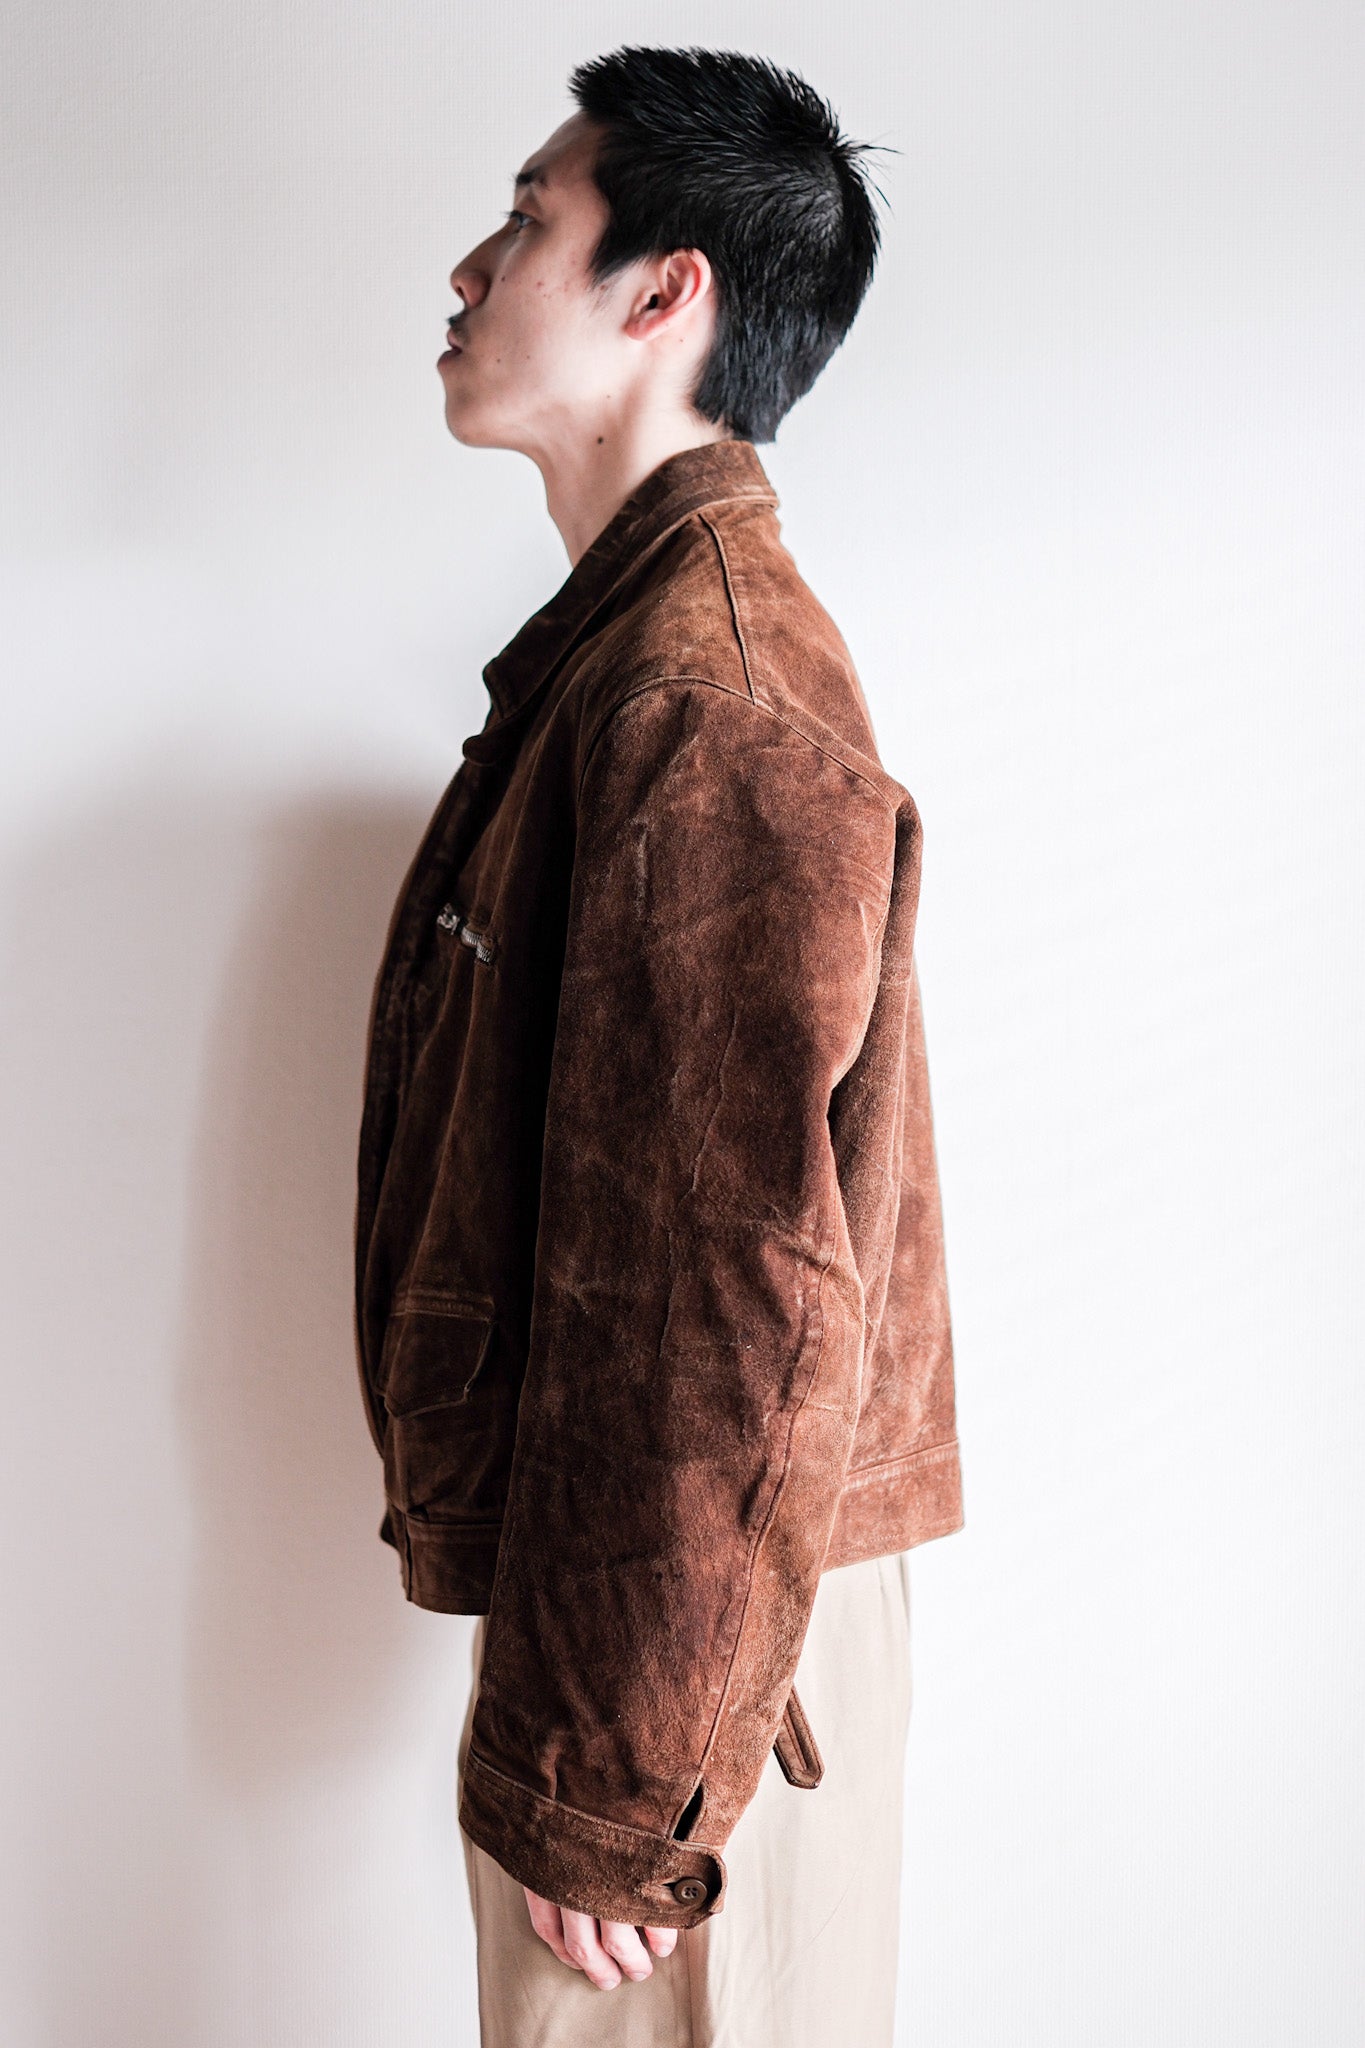 [~ 30's] French Vintage Suede Leather Cyclist Jacket